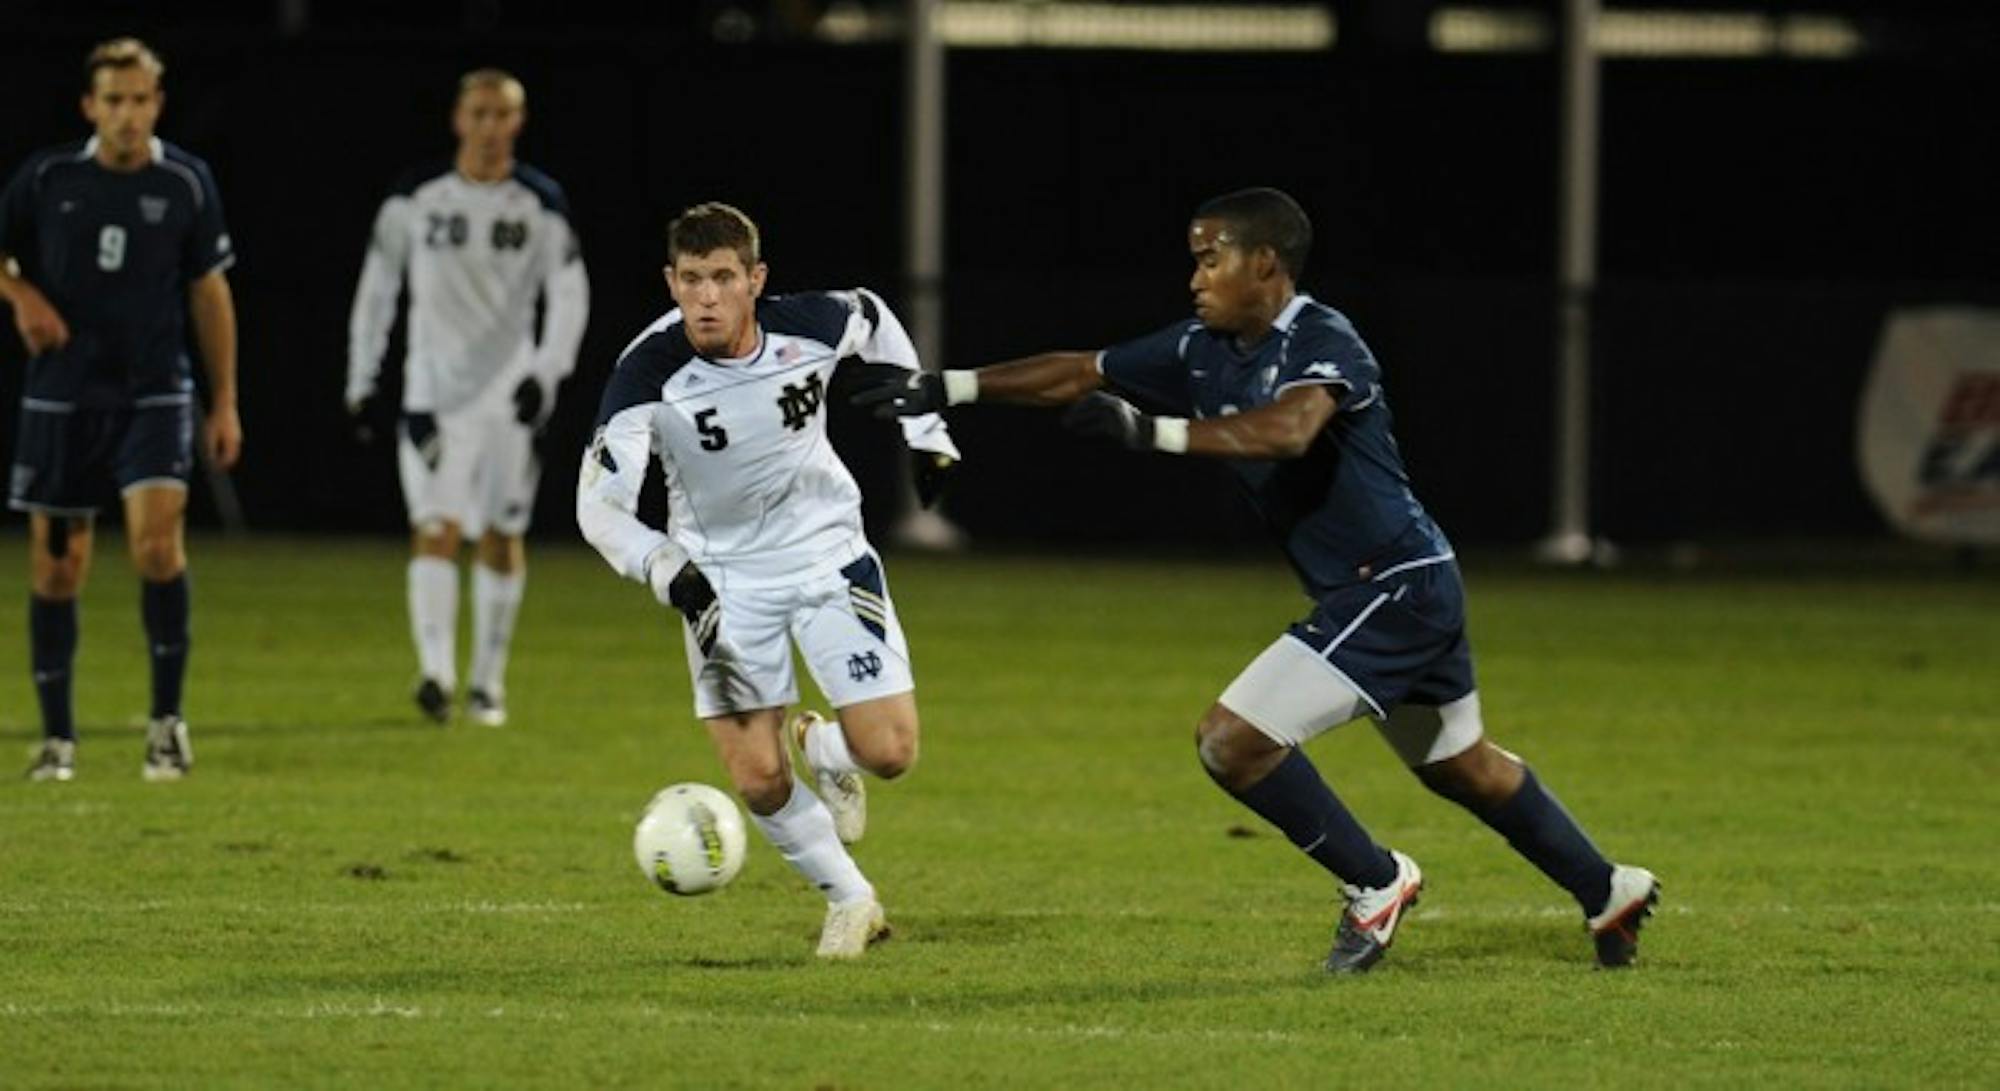 Notre Dame graduate and 2013 MLS Rookie of the Year Dillon Powers moves upfield against Villanova on  Nov. 11, 2011 at Alumni Stadium.